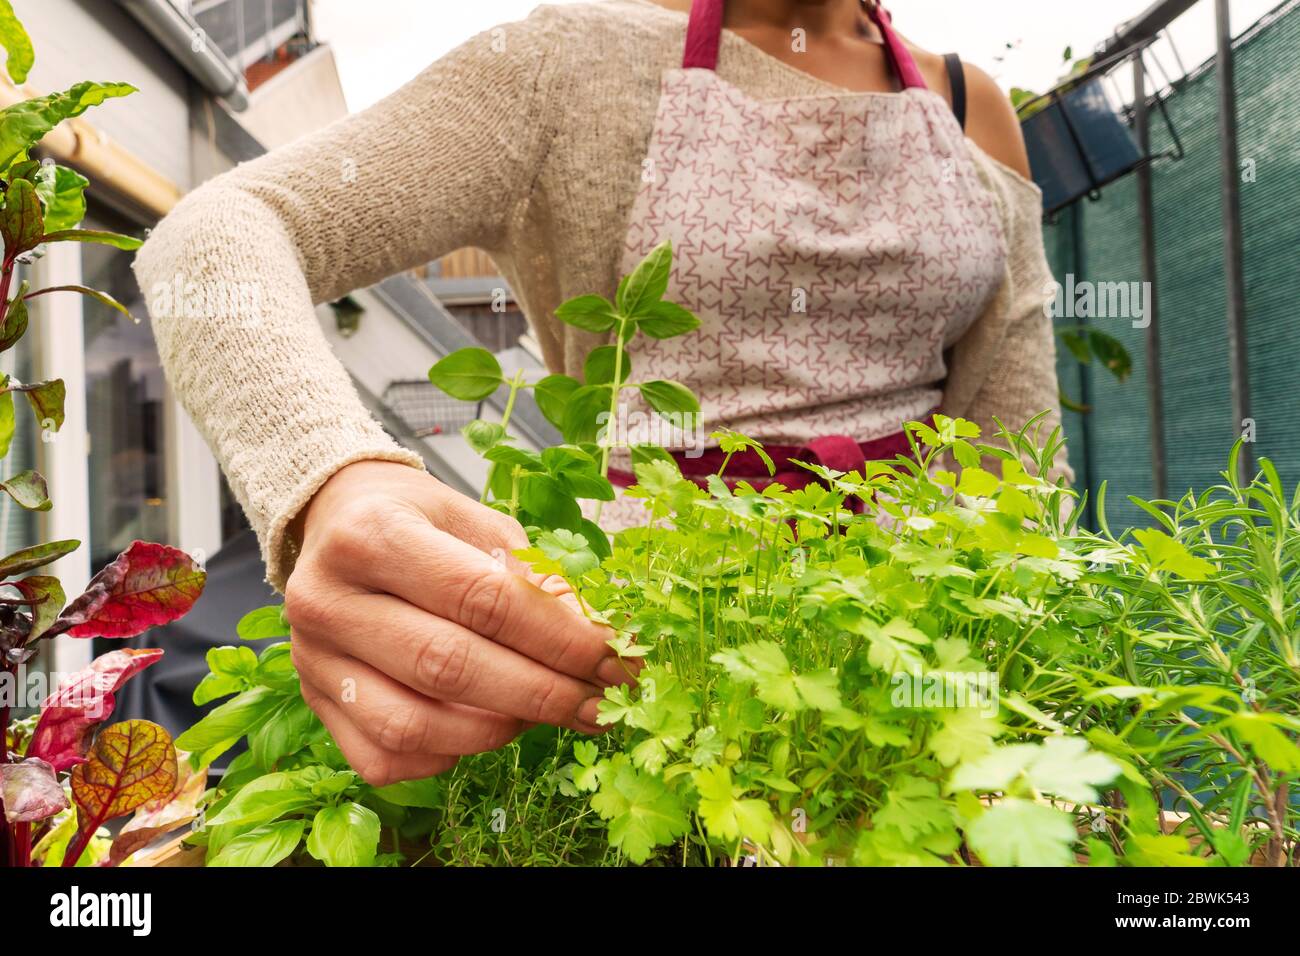 Caucasian woman picking up some aromatic herbs from her garden at the balcony Stock Photo